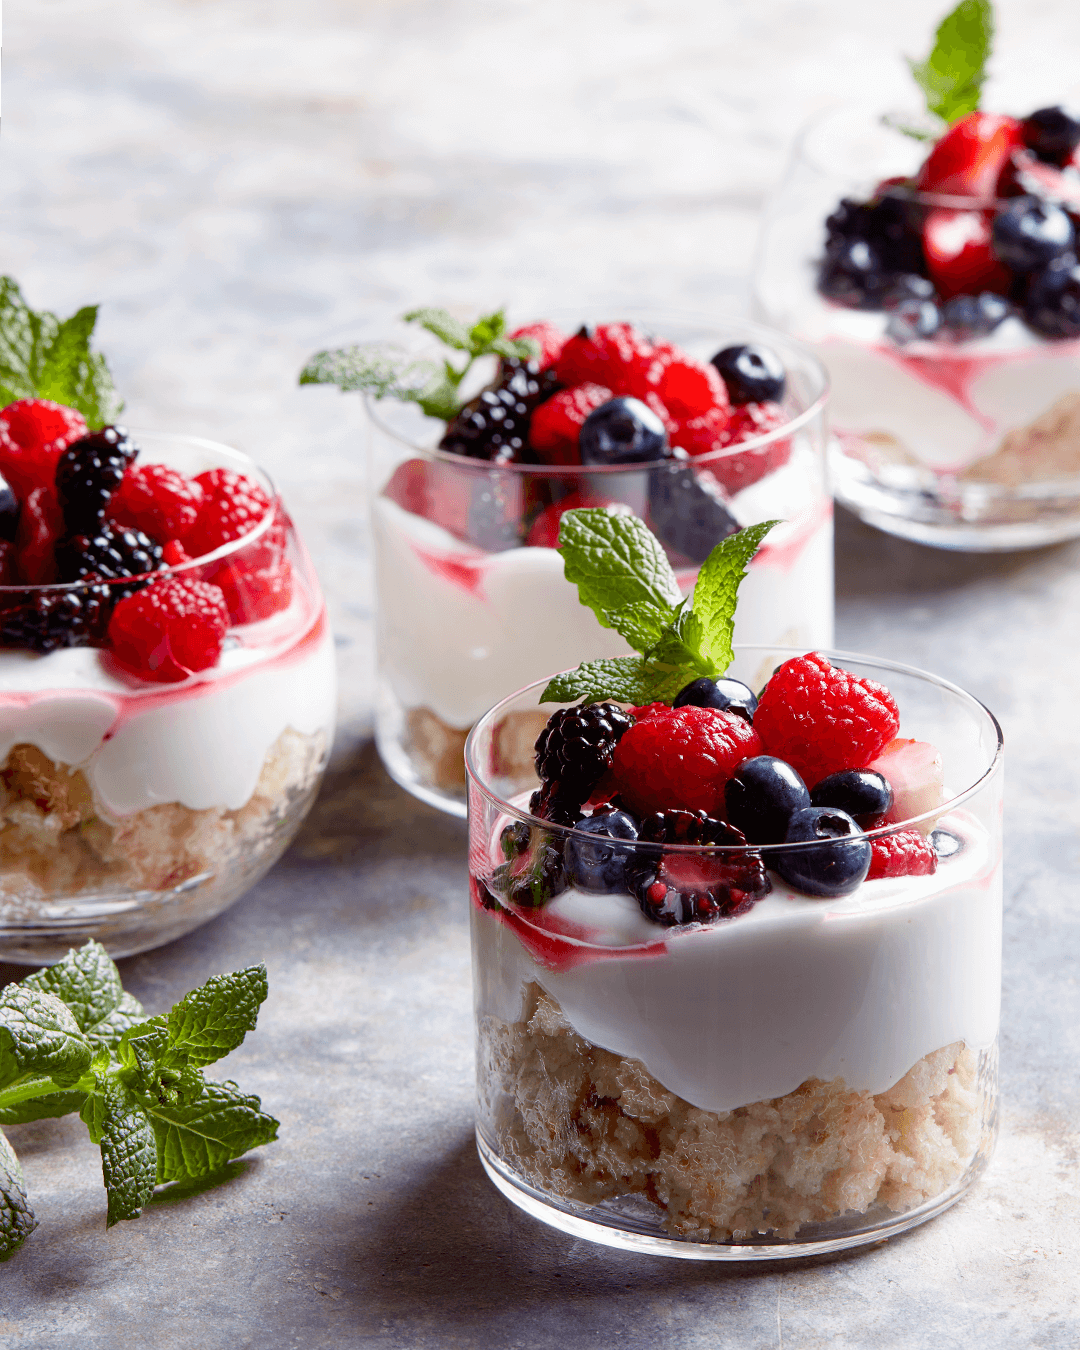 Lemon Trifles with Whipped Cream and Berries